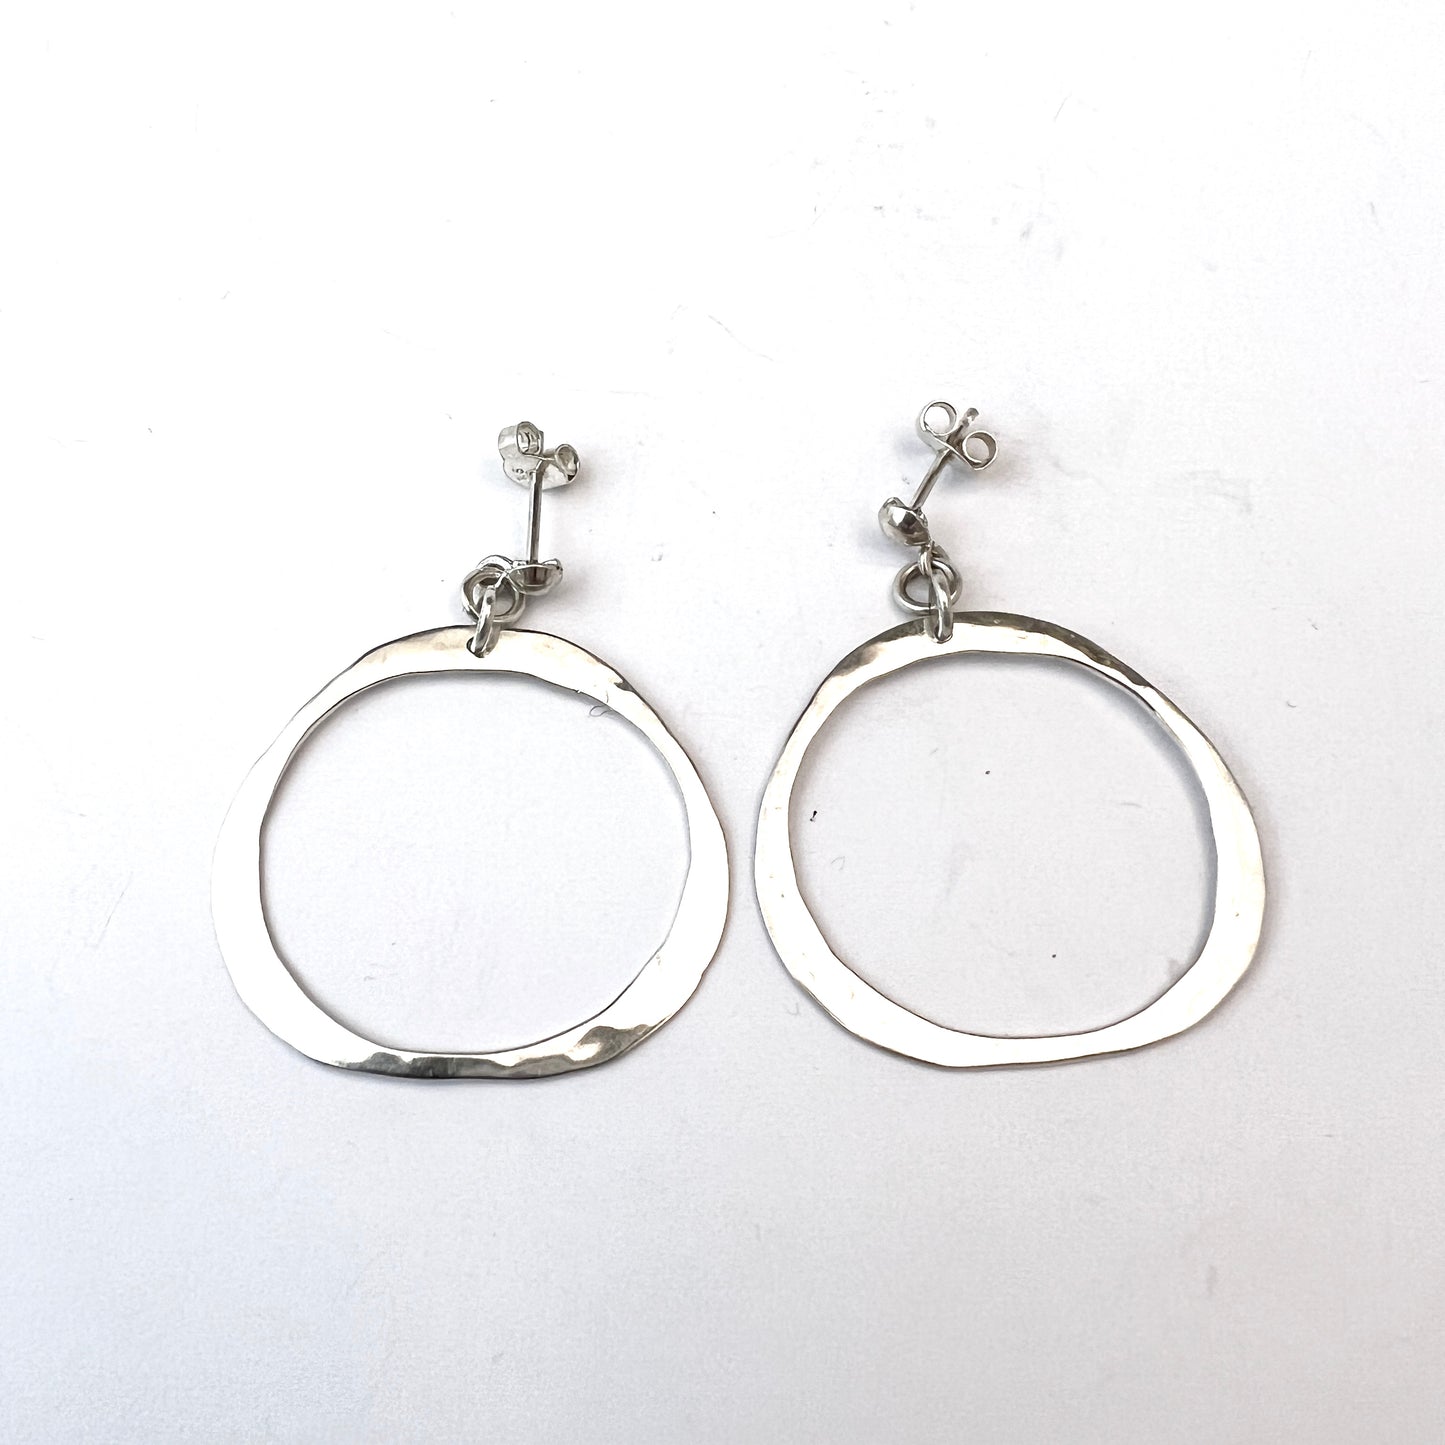 Annie Jagbeck, Sweden 1970s. Signed. Sterling Silver Earrings.